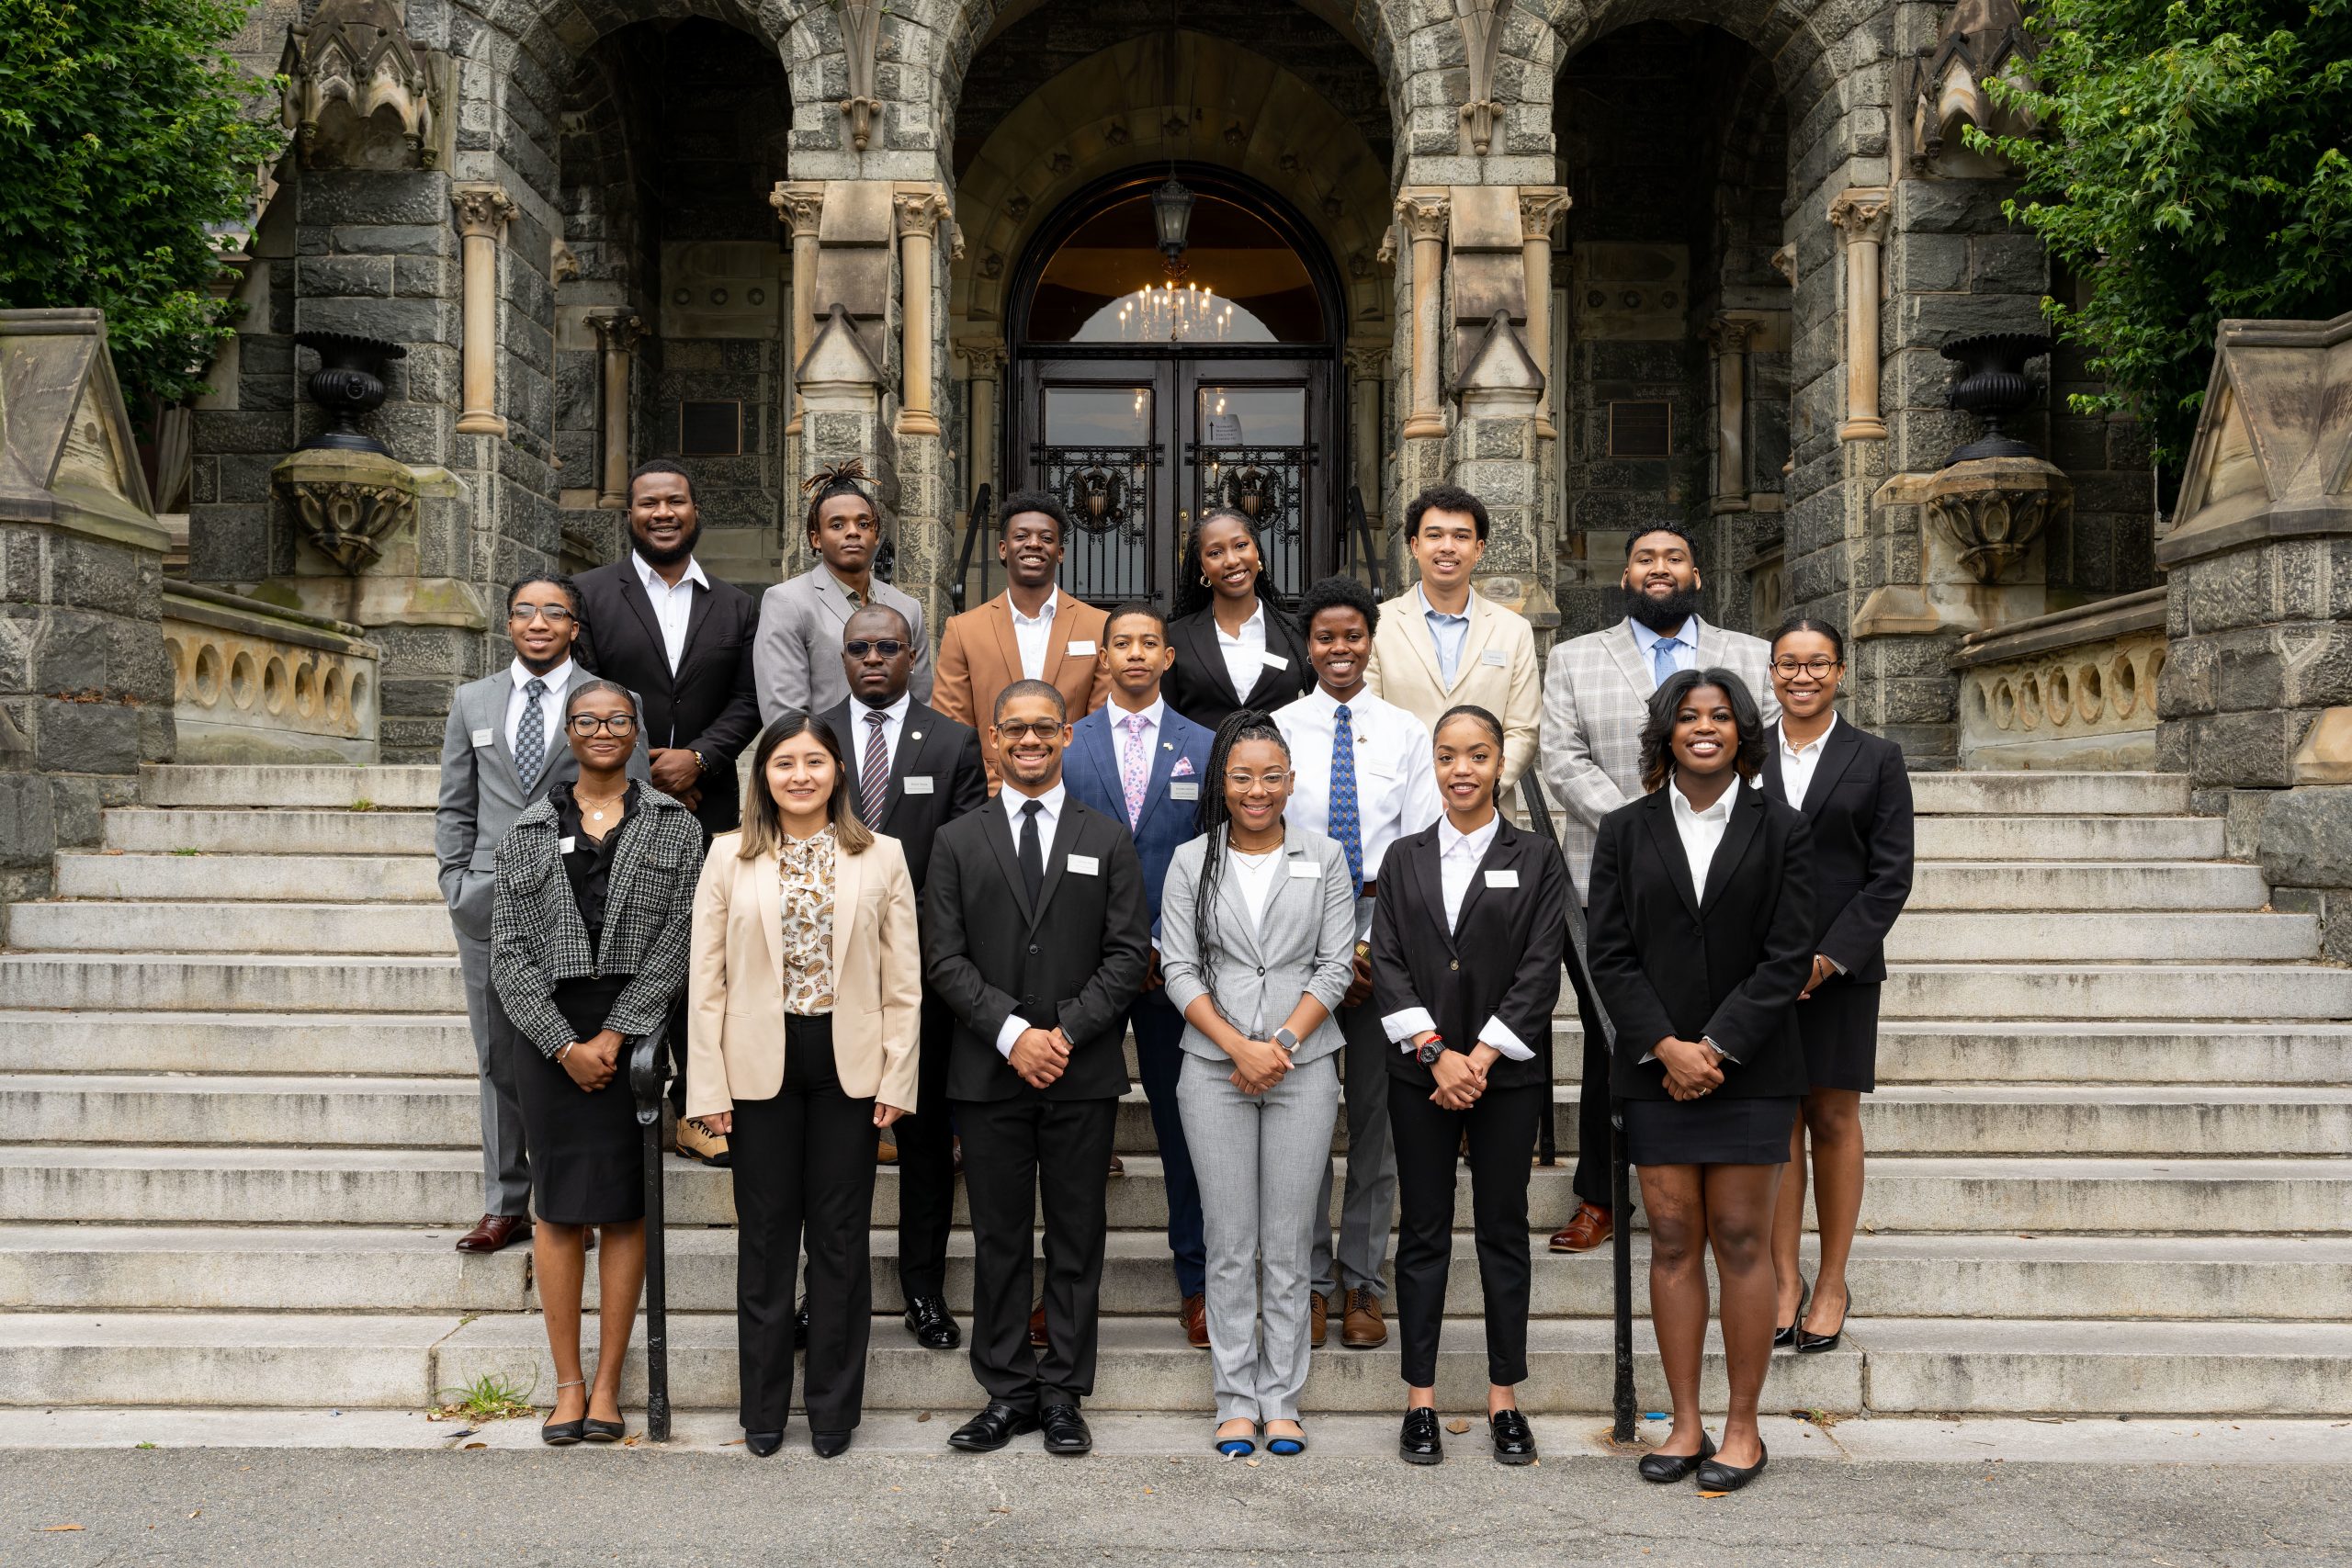 The Security Studies Summer Institute cohort for 2023 stands on the steps of Healy Hall, the historic Georgetown building.